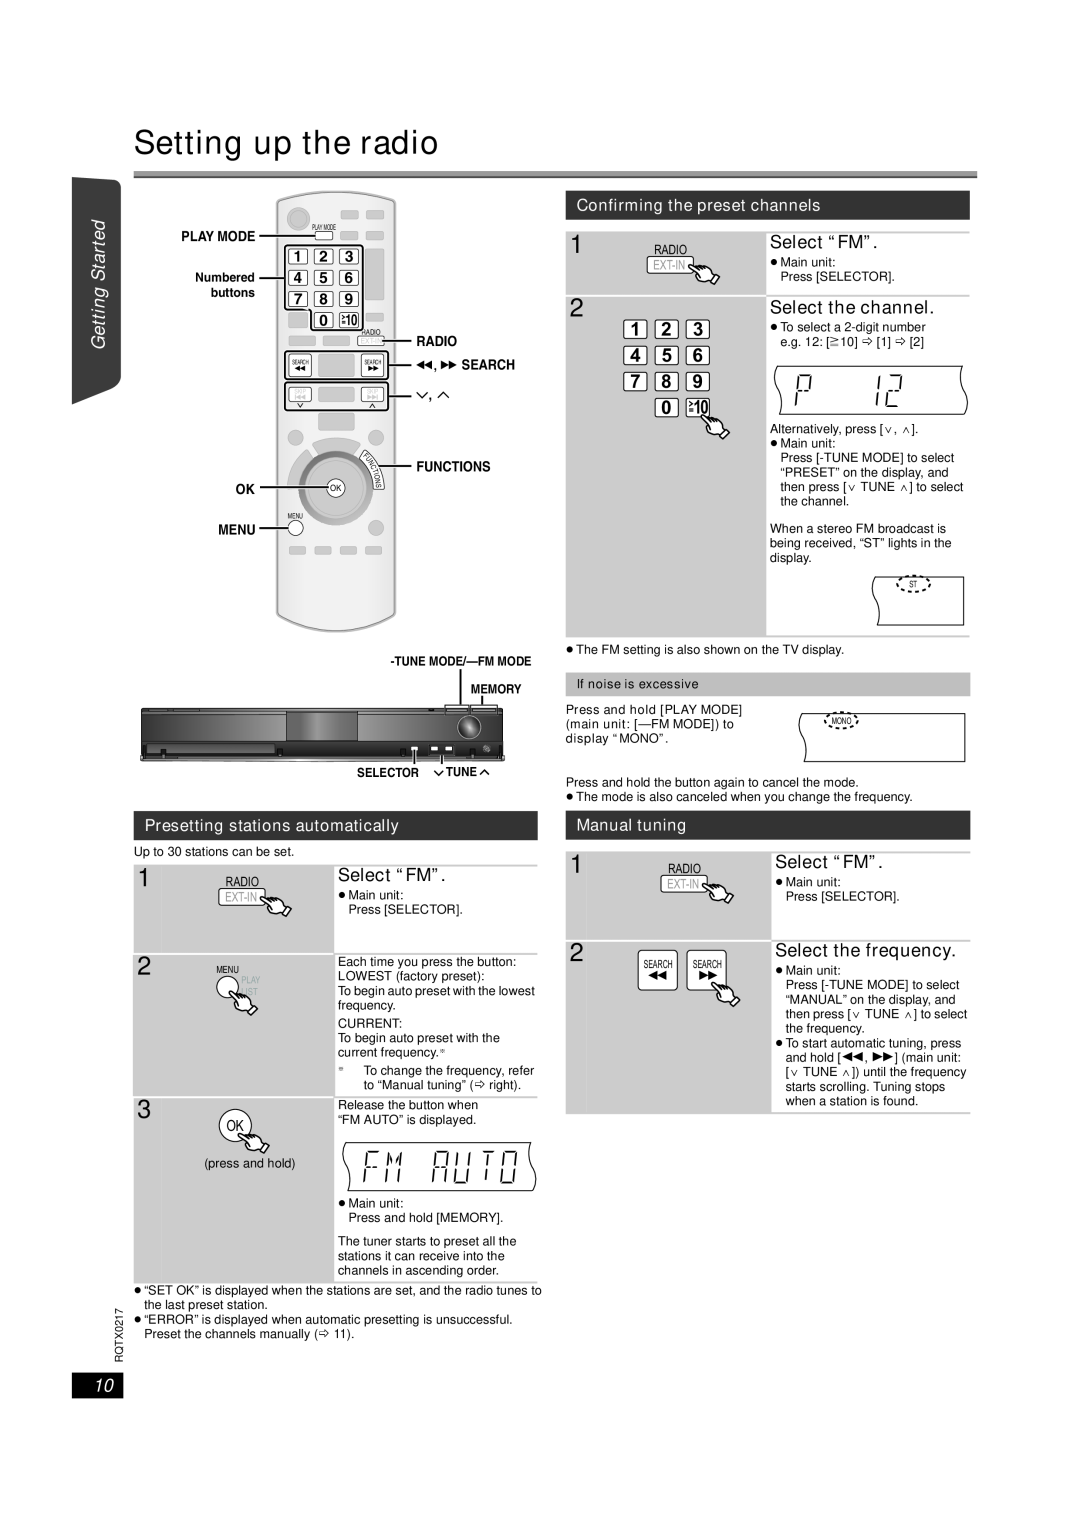 Panasonic SC-PT464 Setting up the radio, Select “FM”, Select the channel, Select the frequency, Manual tuning, 1 2 4 5 7 